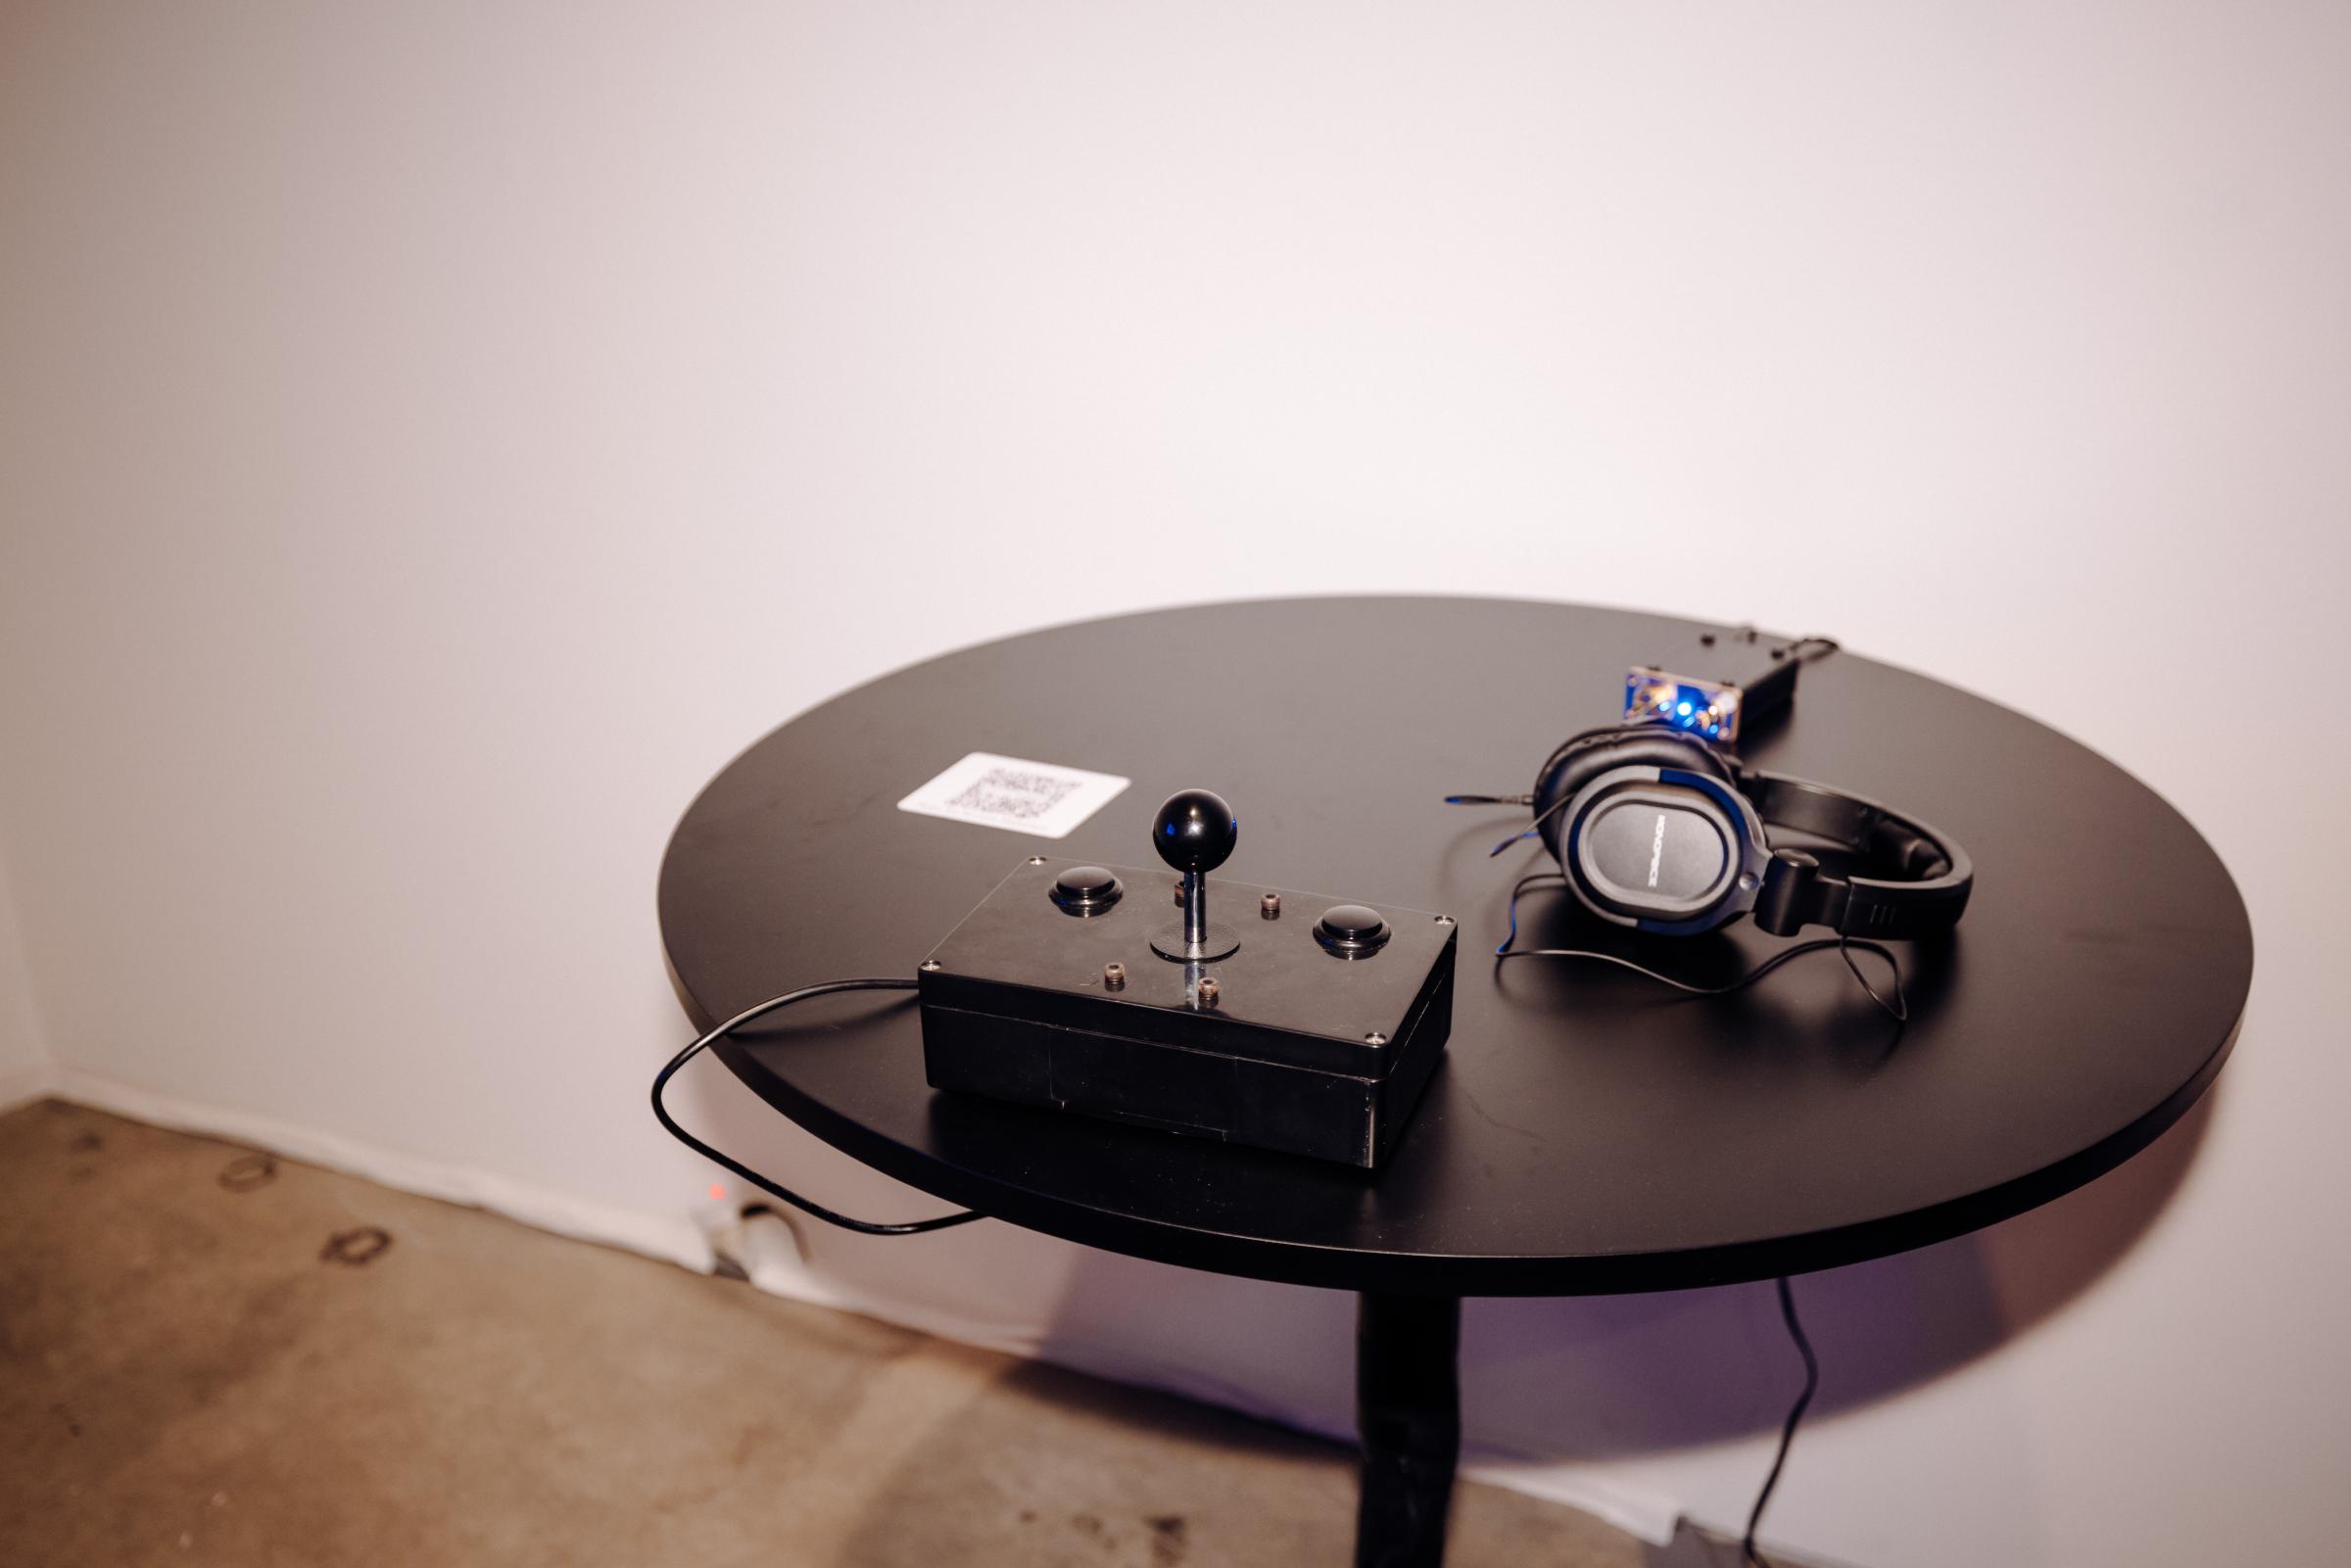 Circular table with joystick and buttons on a controller. There is a headphone amp with lights on and a pair of headphones directly in front of the controller. To the left of the controller is a QR code. 